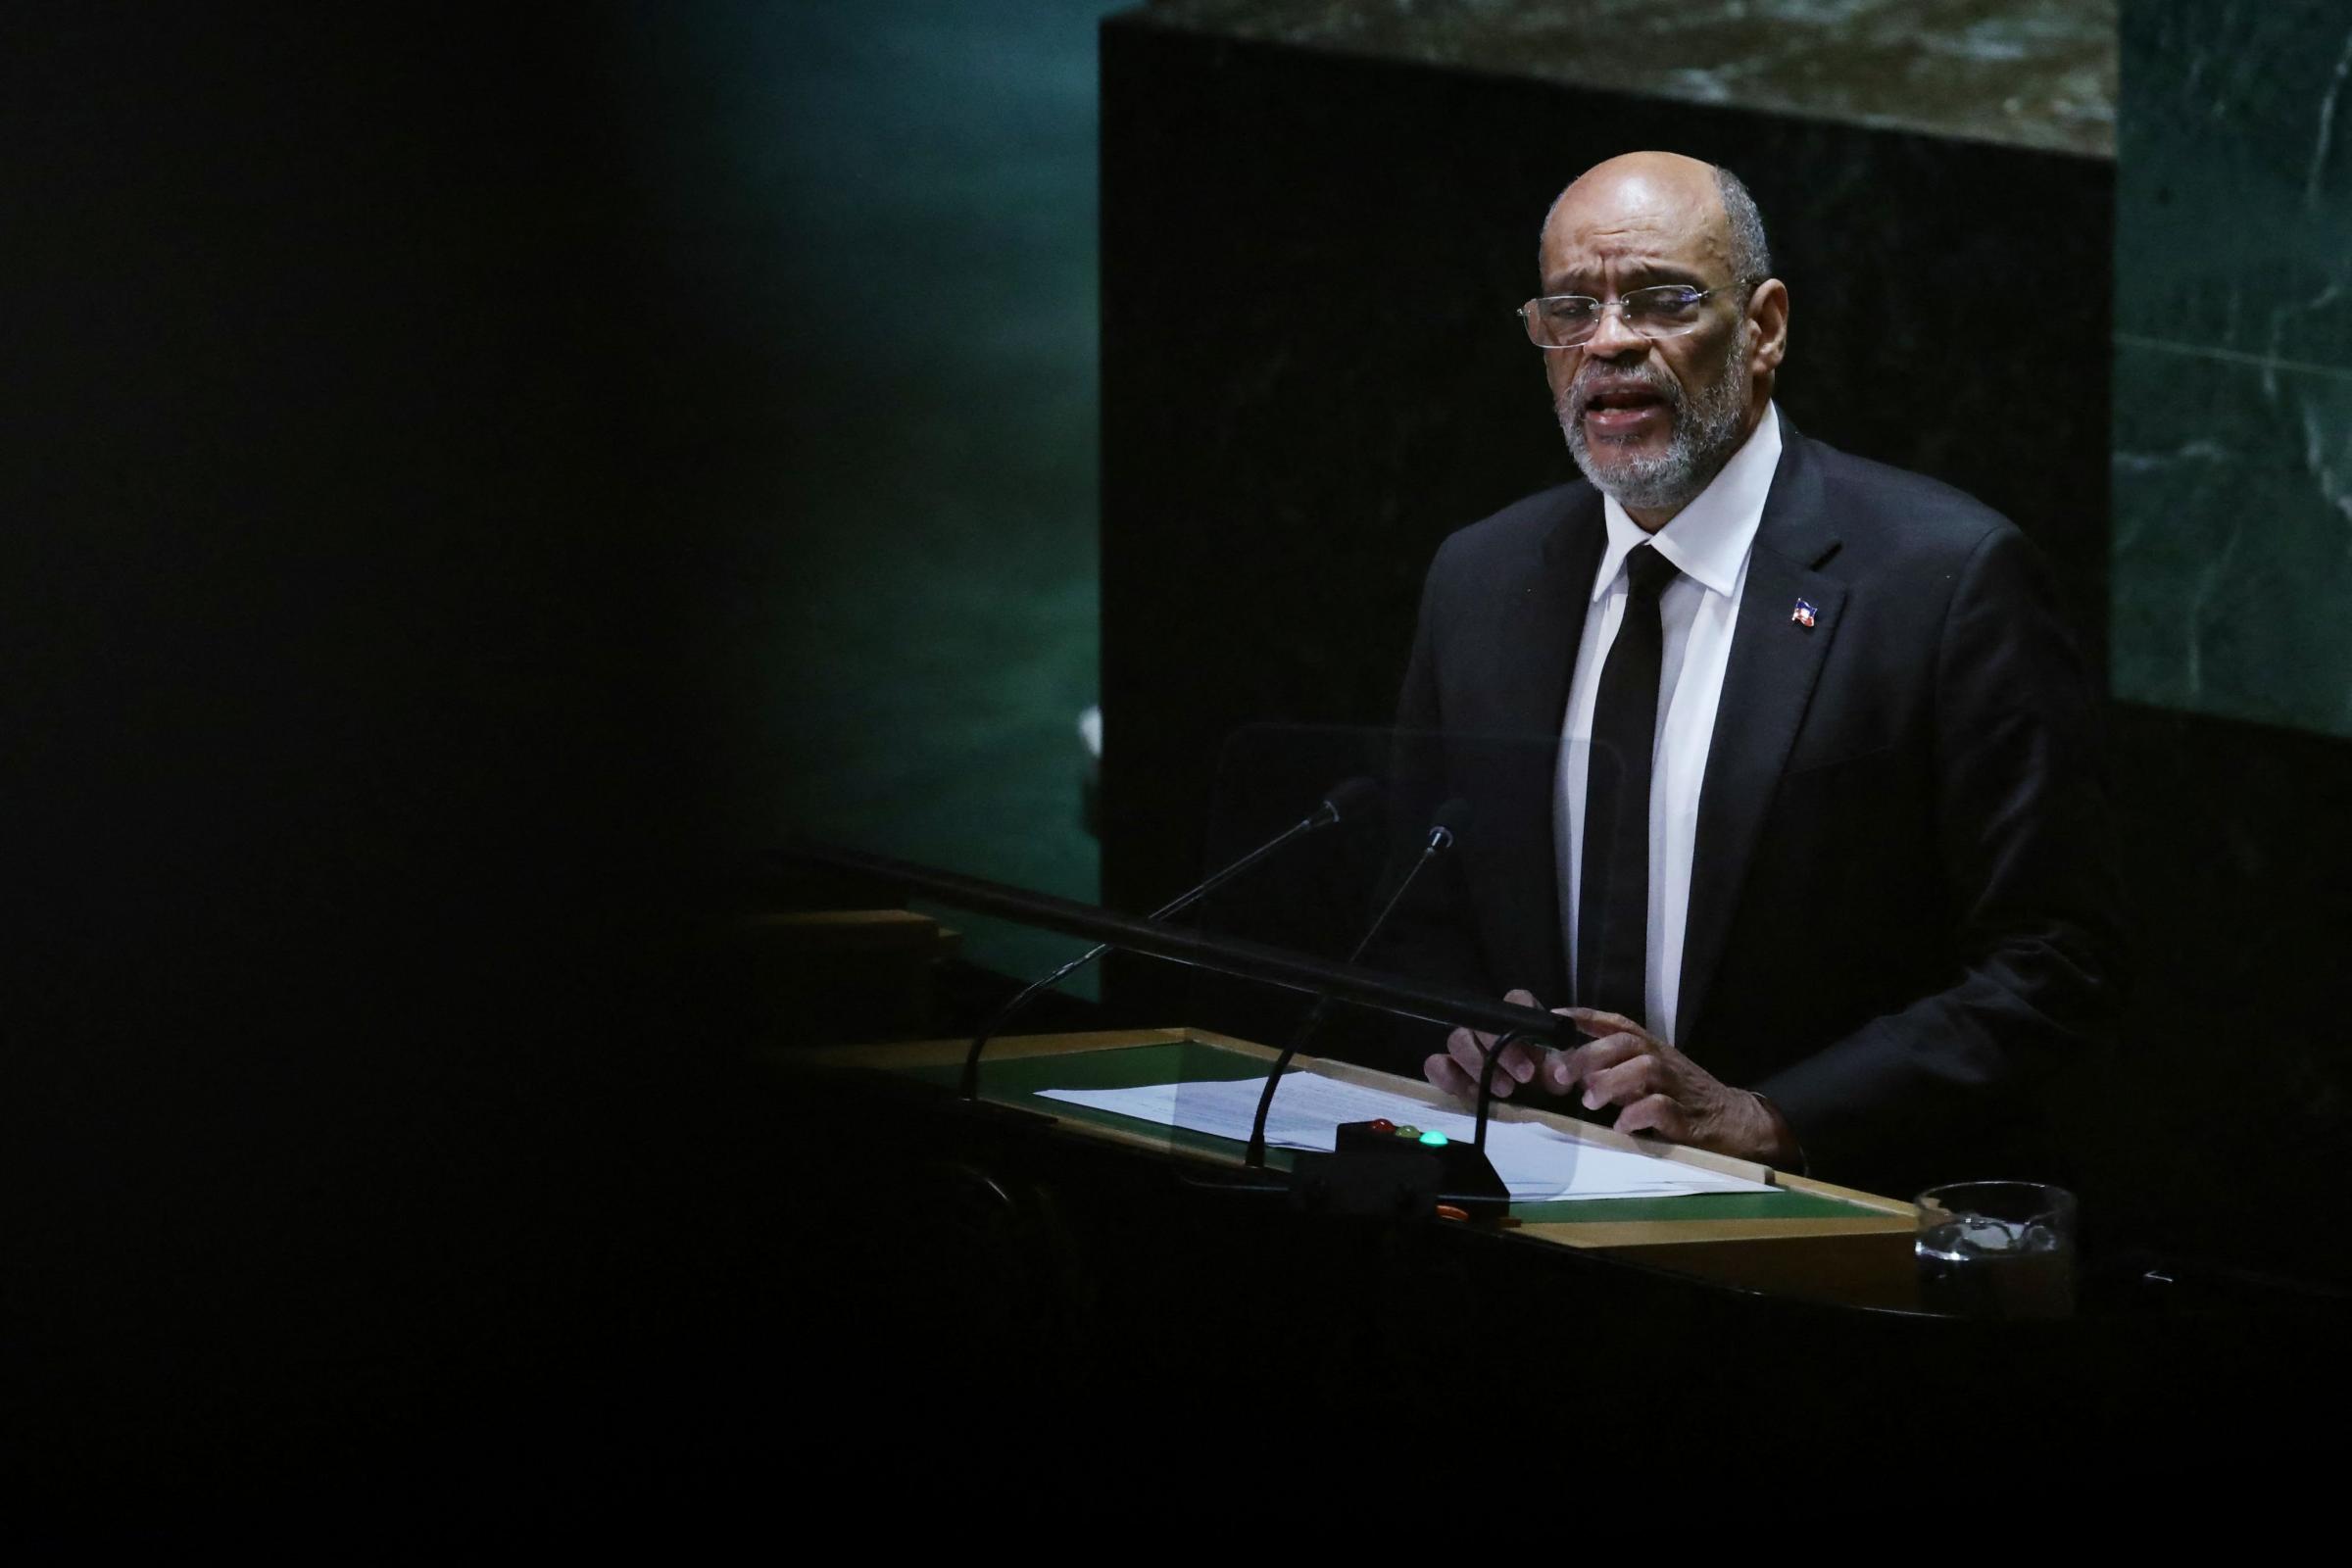 Haitian Prime Minister Ariel Henry addresses the 78th United Nations General Assembly at UN headquarters in New York City on September 22, 2023. (Photo by Leonardo Munoz / AFP) (Photo by LEONARDO MUNOZ/AFP via Getty Images).